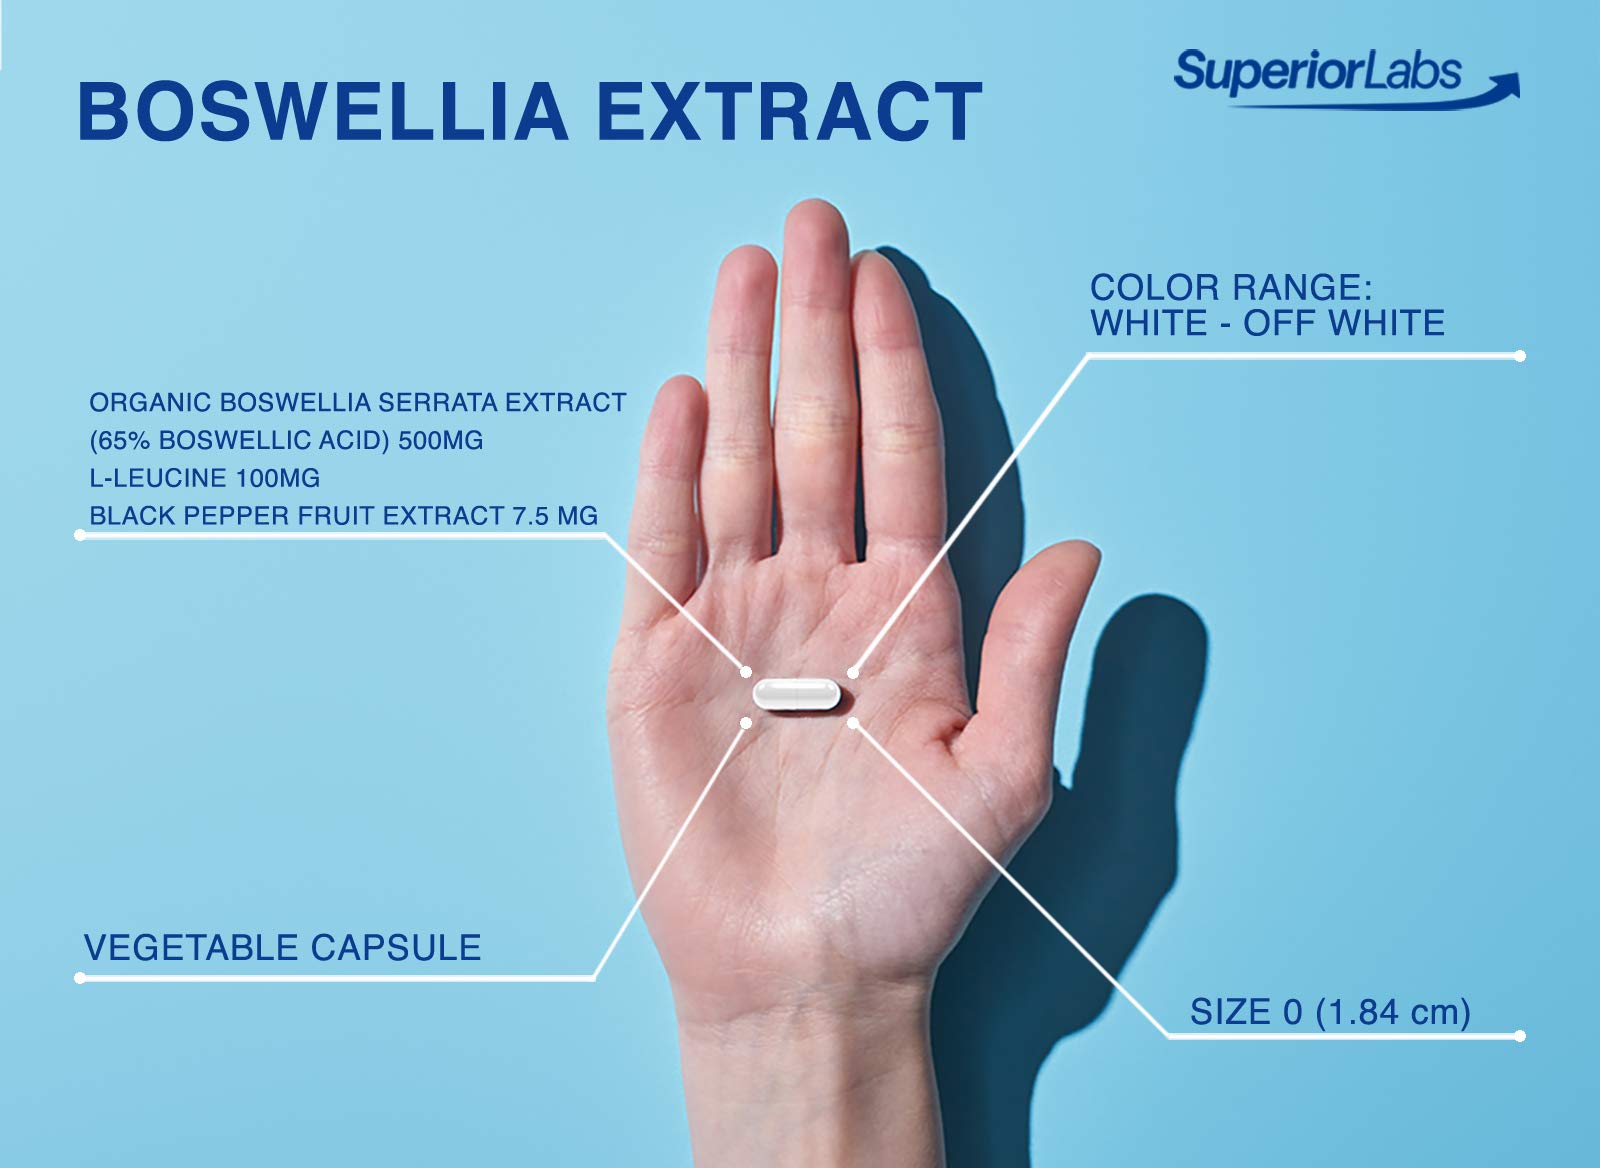 Superior Labs Boswellia Extract - Pure Non GMO Boswellic 65% Acids. Superior Absorption Zero Synthetic Additives - Powerful Formula Joint, Knees, Hips, Immune, 500mg SVG, 240 Veg Capsules